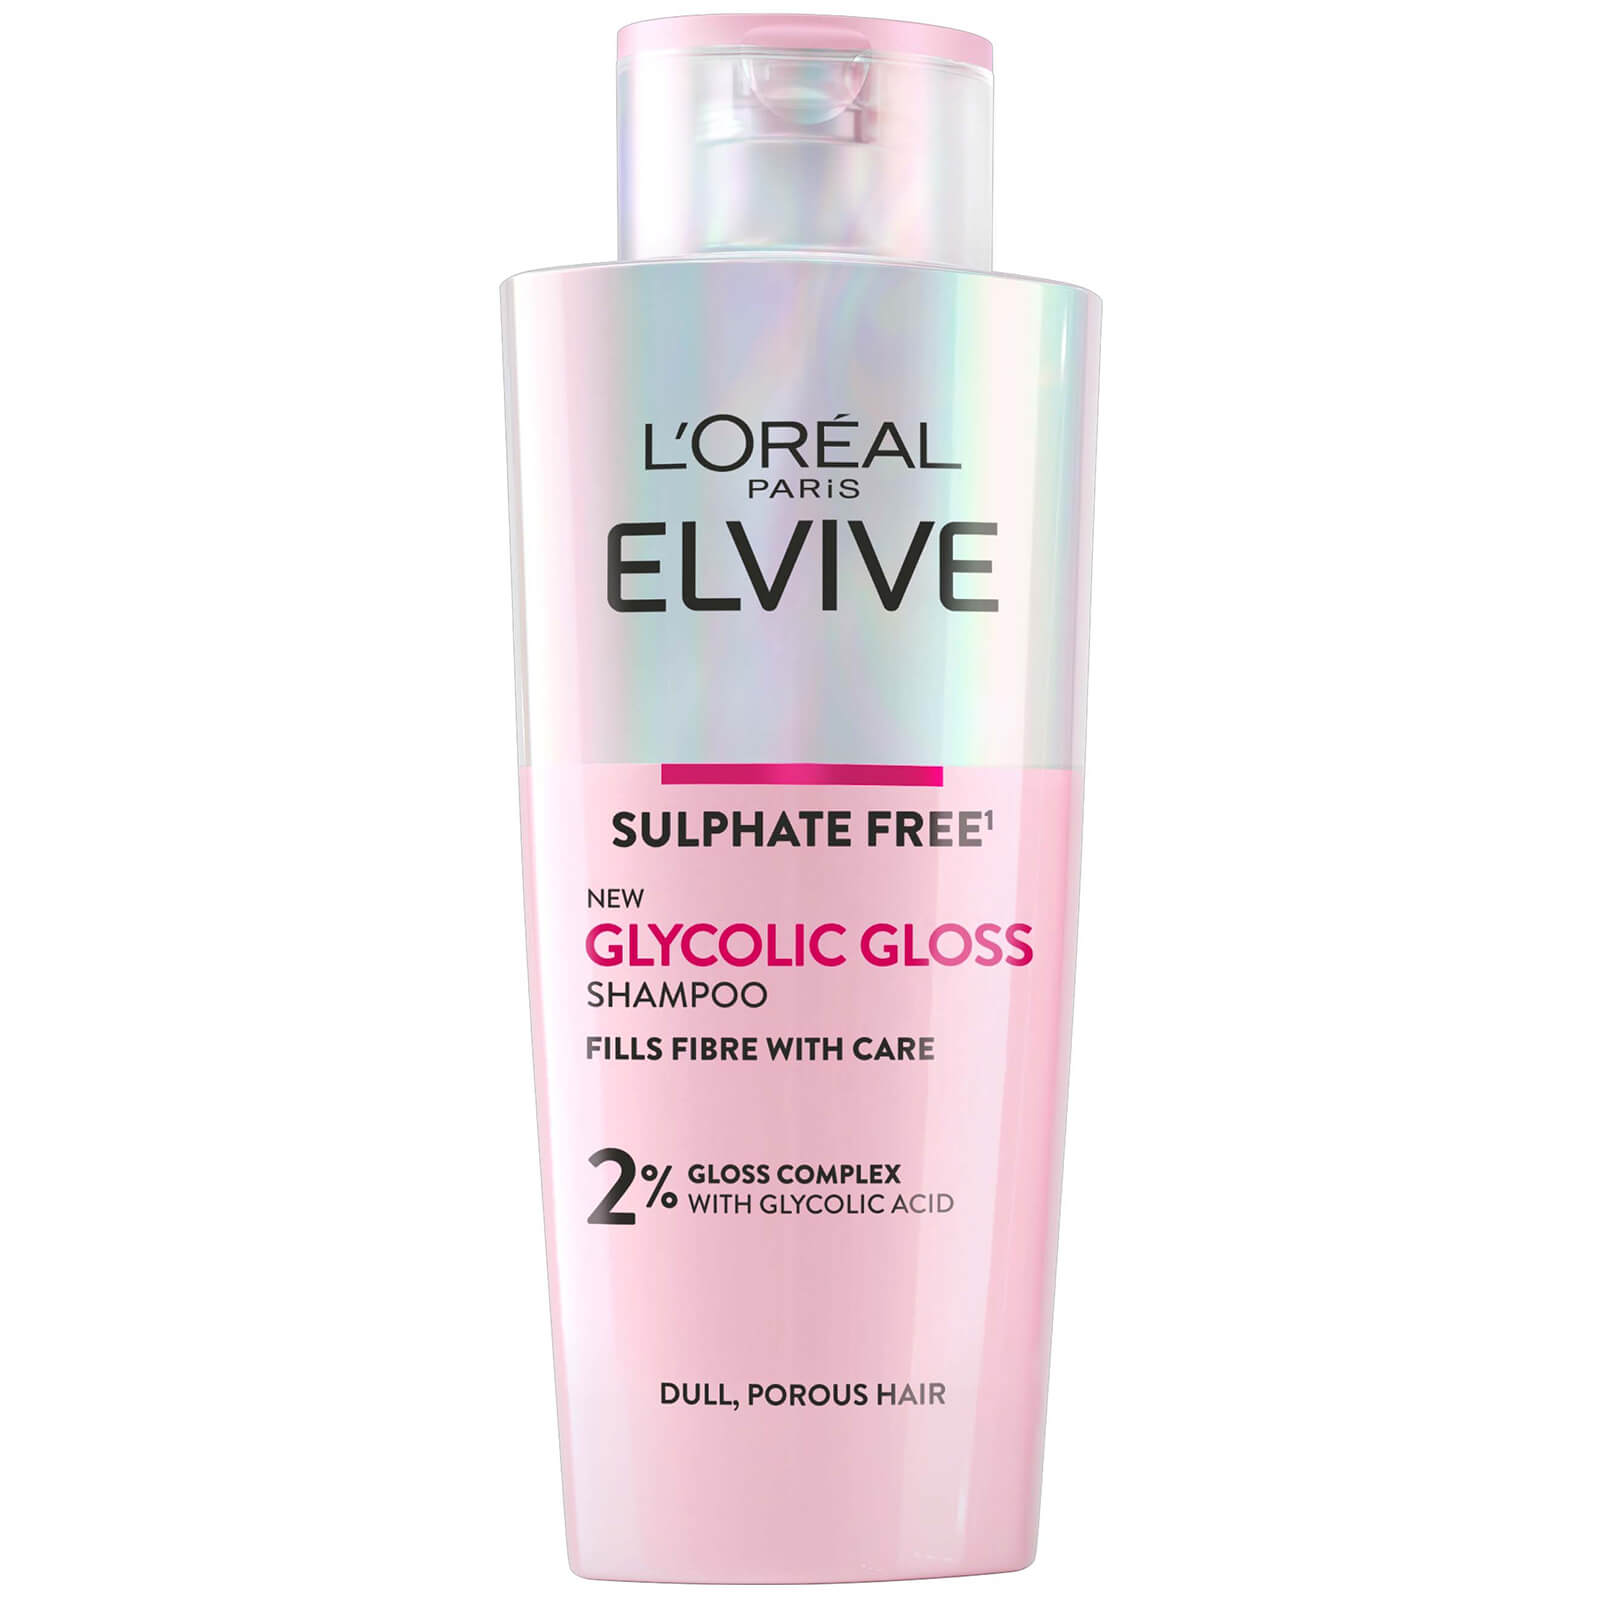 L'Oreal Paris Elvive Glycolic Gloss Sulphate Free Shampoo for Dull Hair 200ml